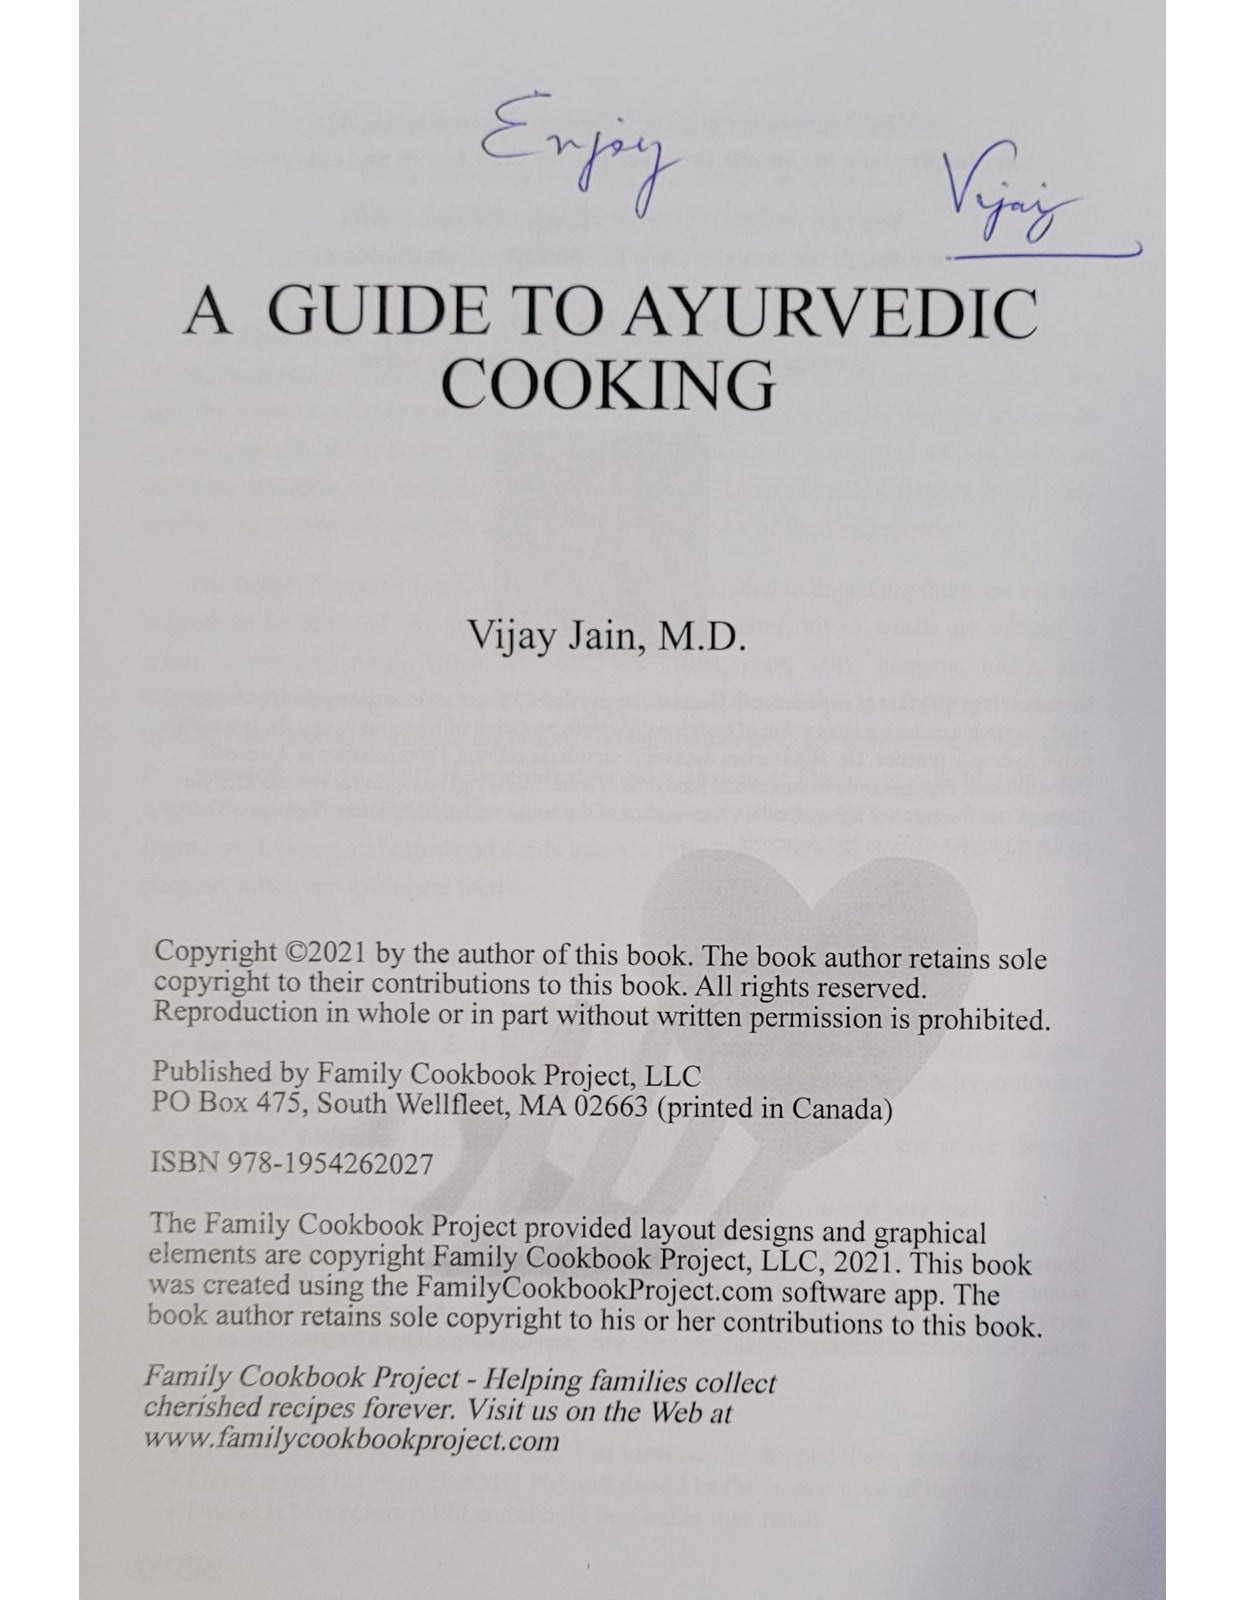 A Guide to Ayurvedic Cooking, by Vijay Jain, M.D. (2021)